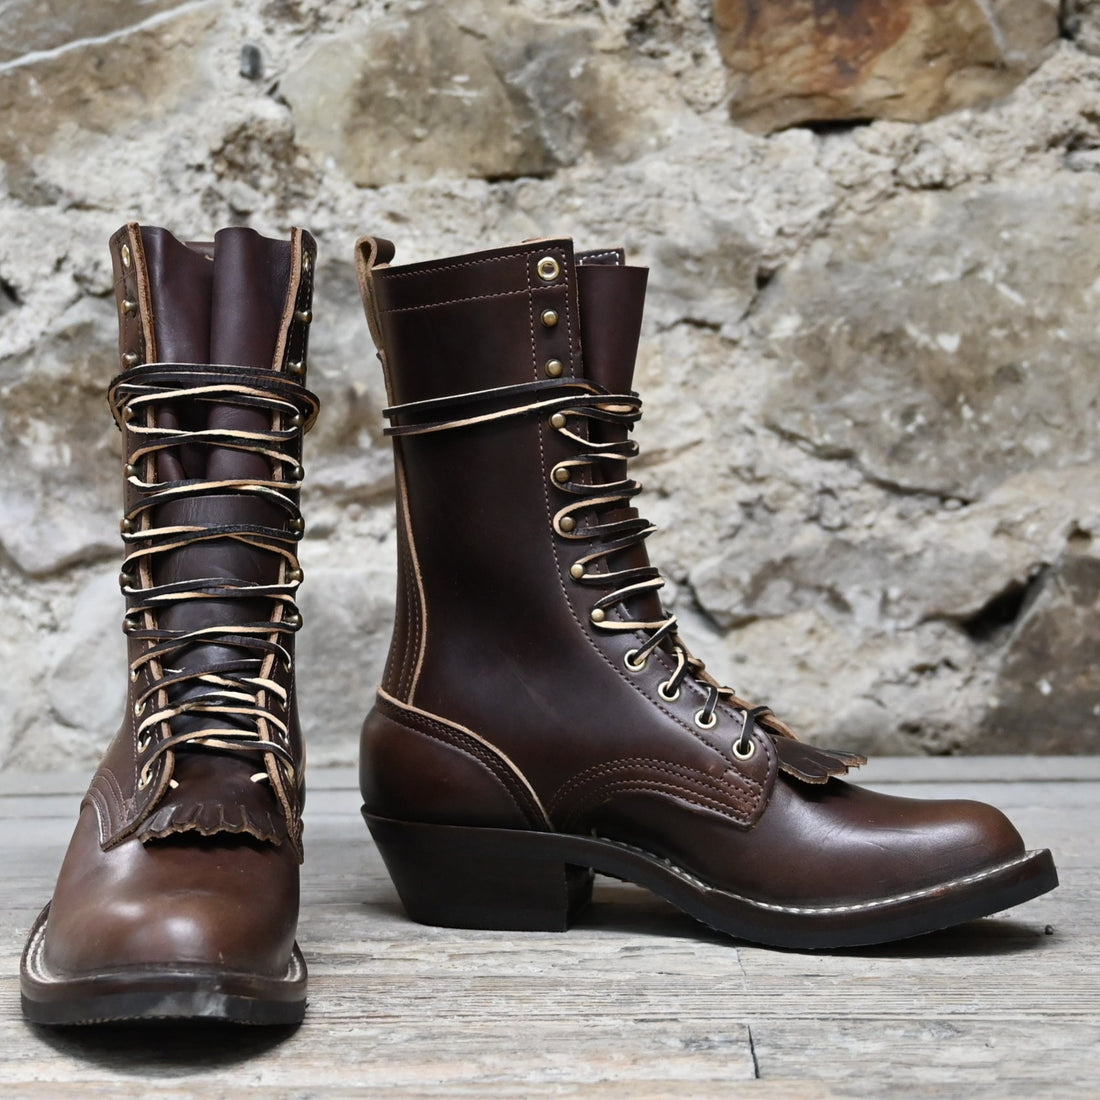 Nicks Rancher Boot in Chrome-Tanned Brown Heritage Leather view of front and side